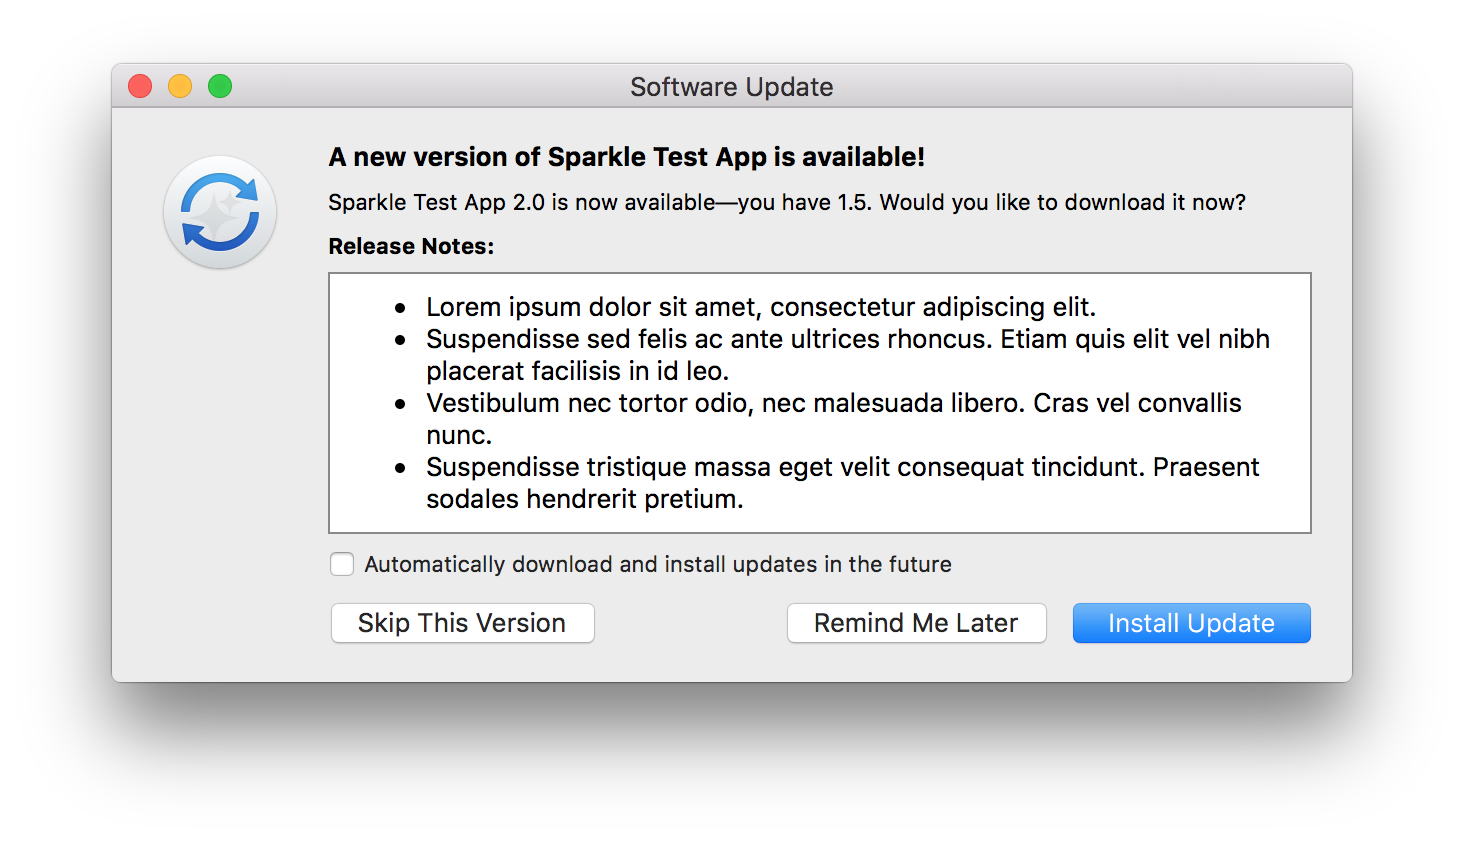 Sparkle shows familiar update window with release notes